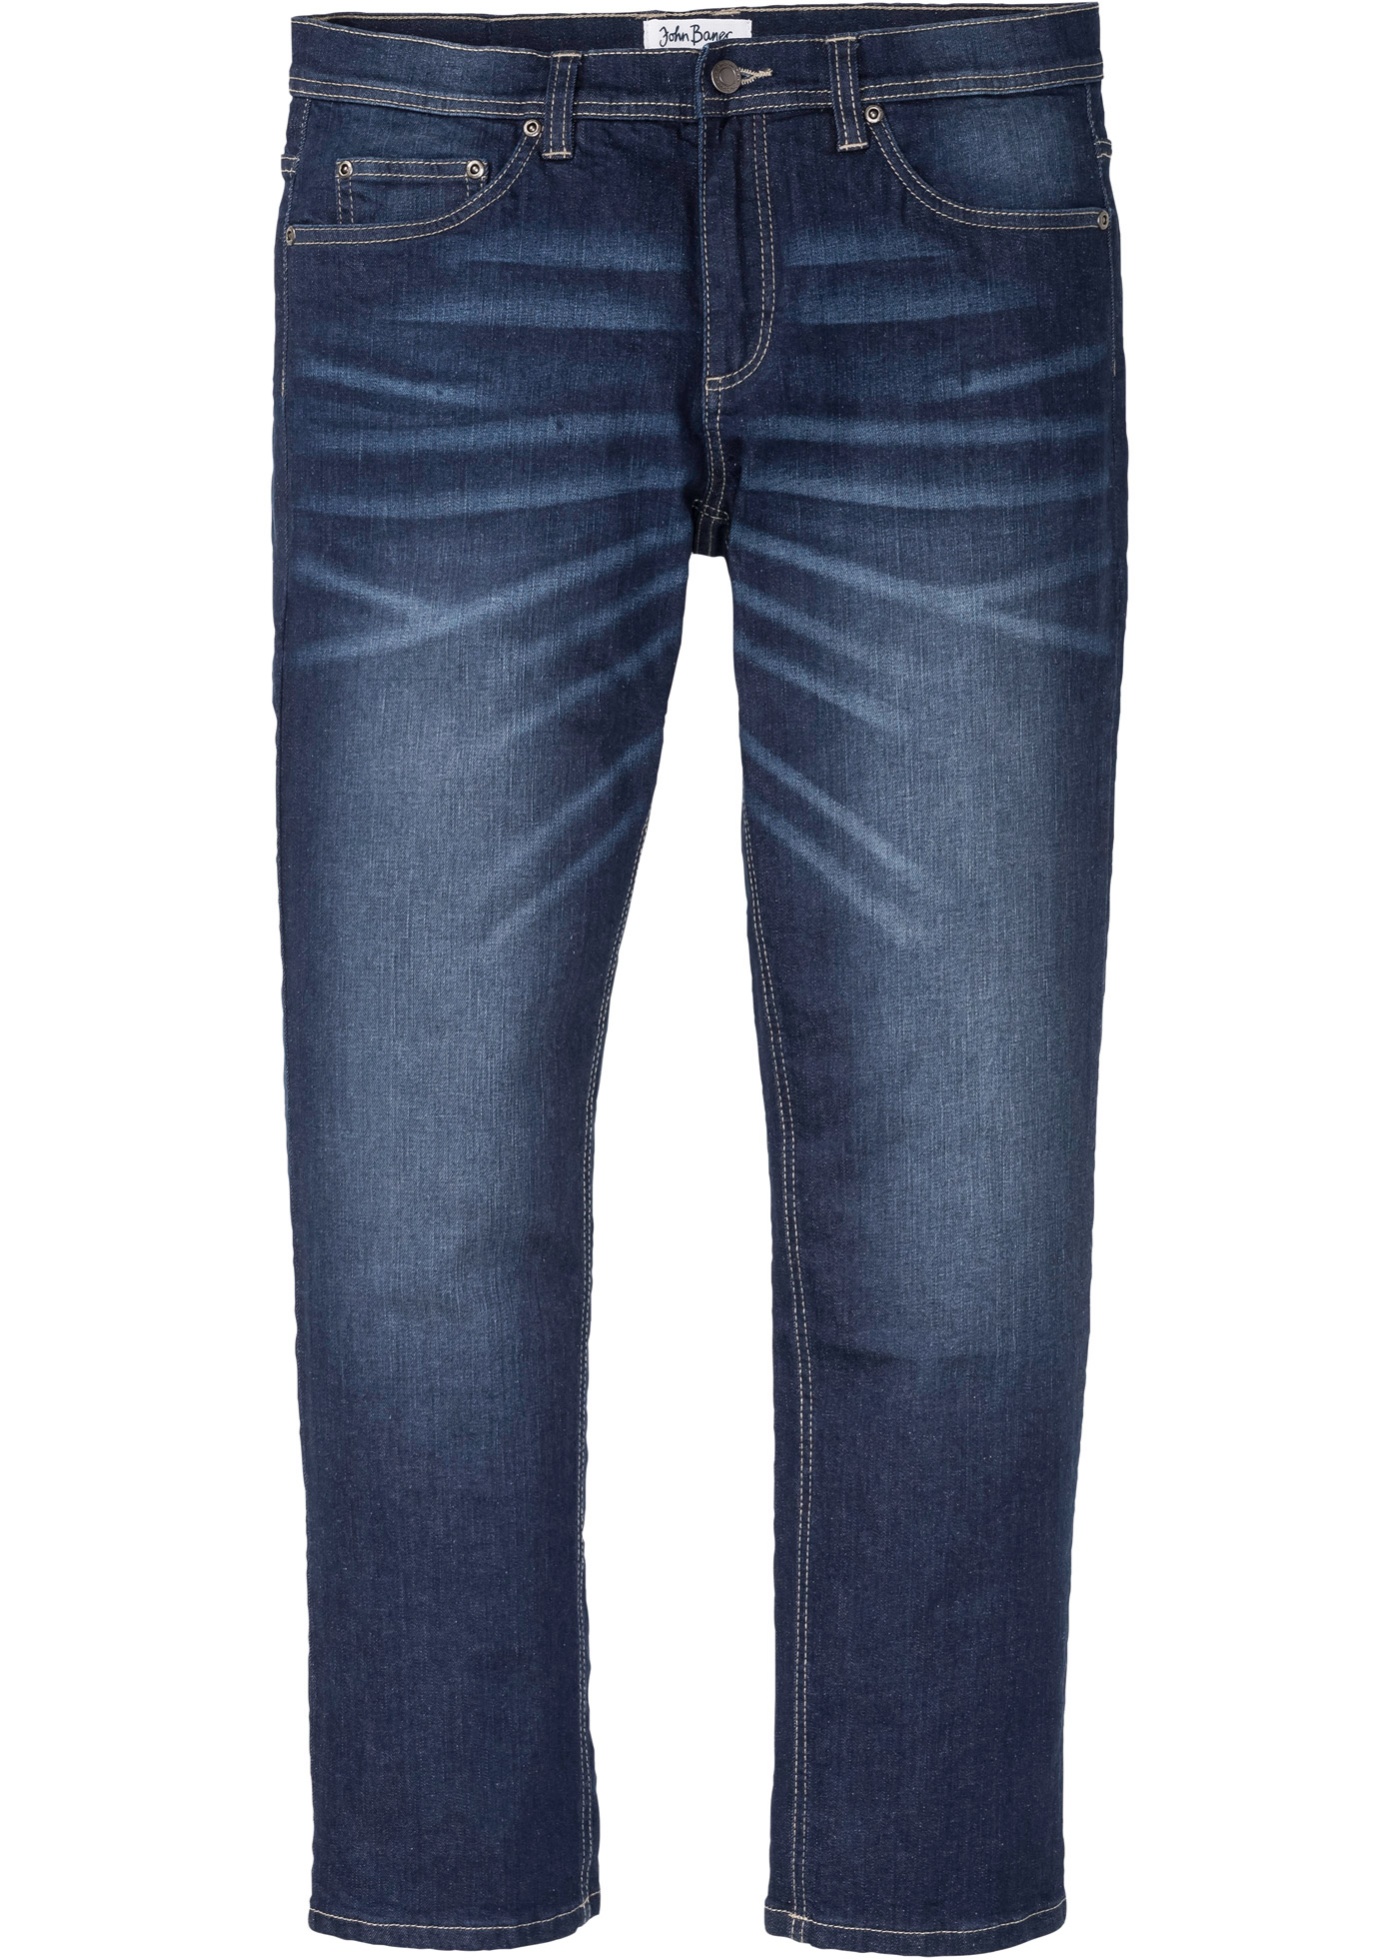 Regular fit stretch jeans, straight